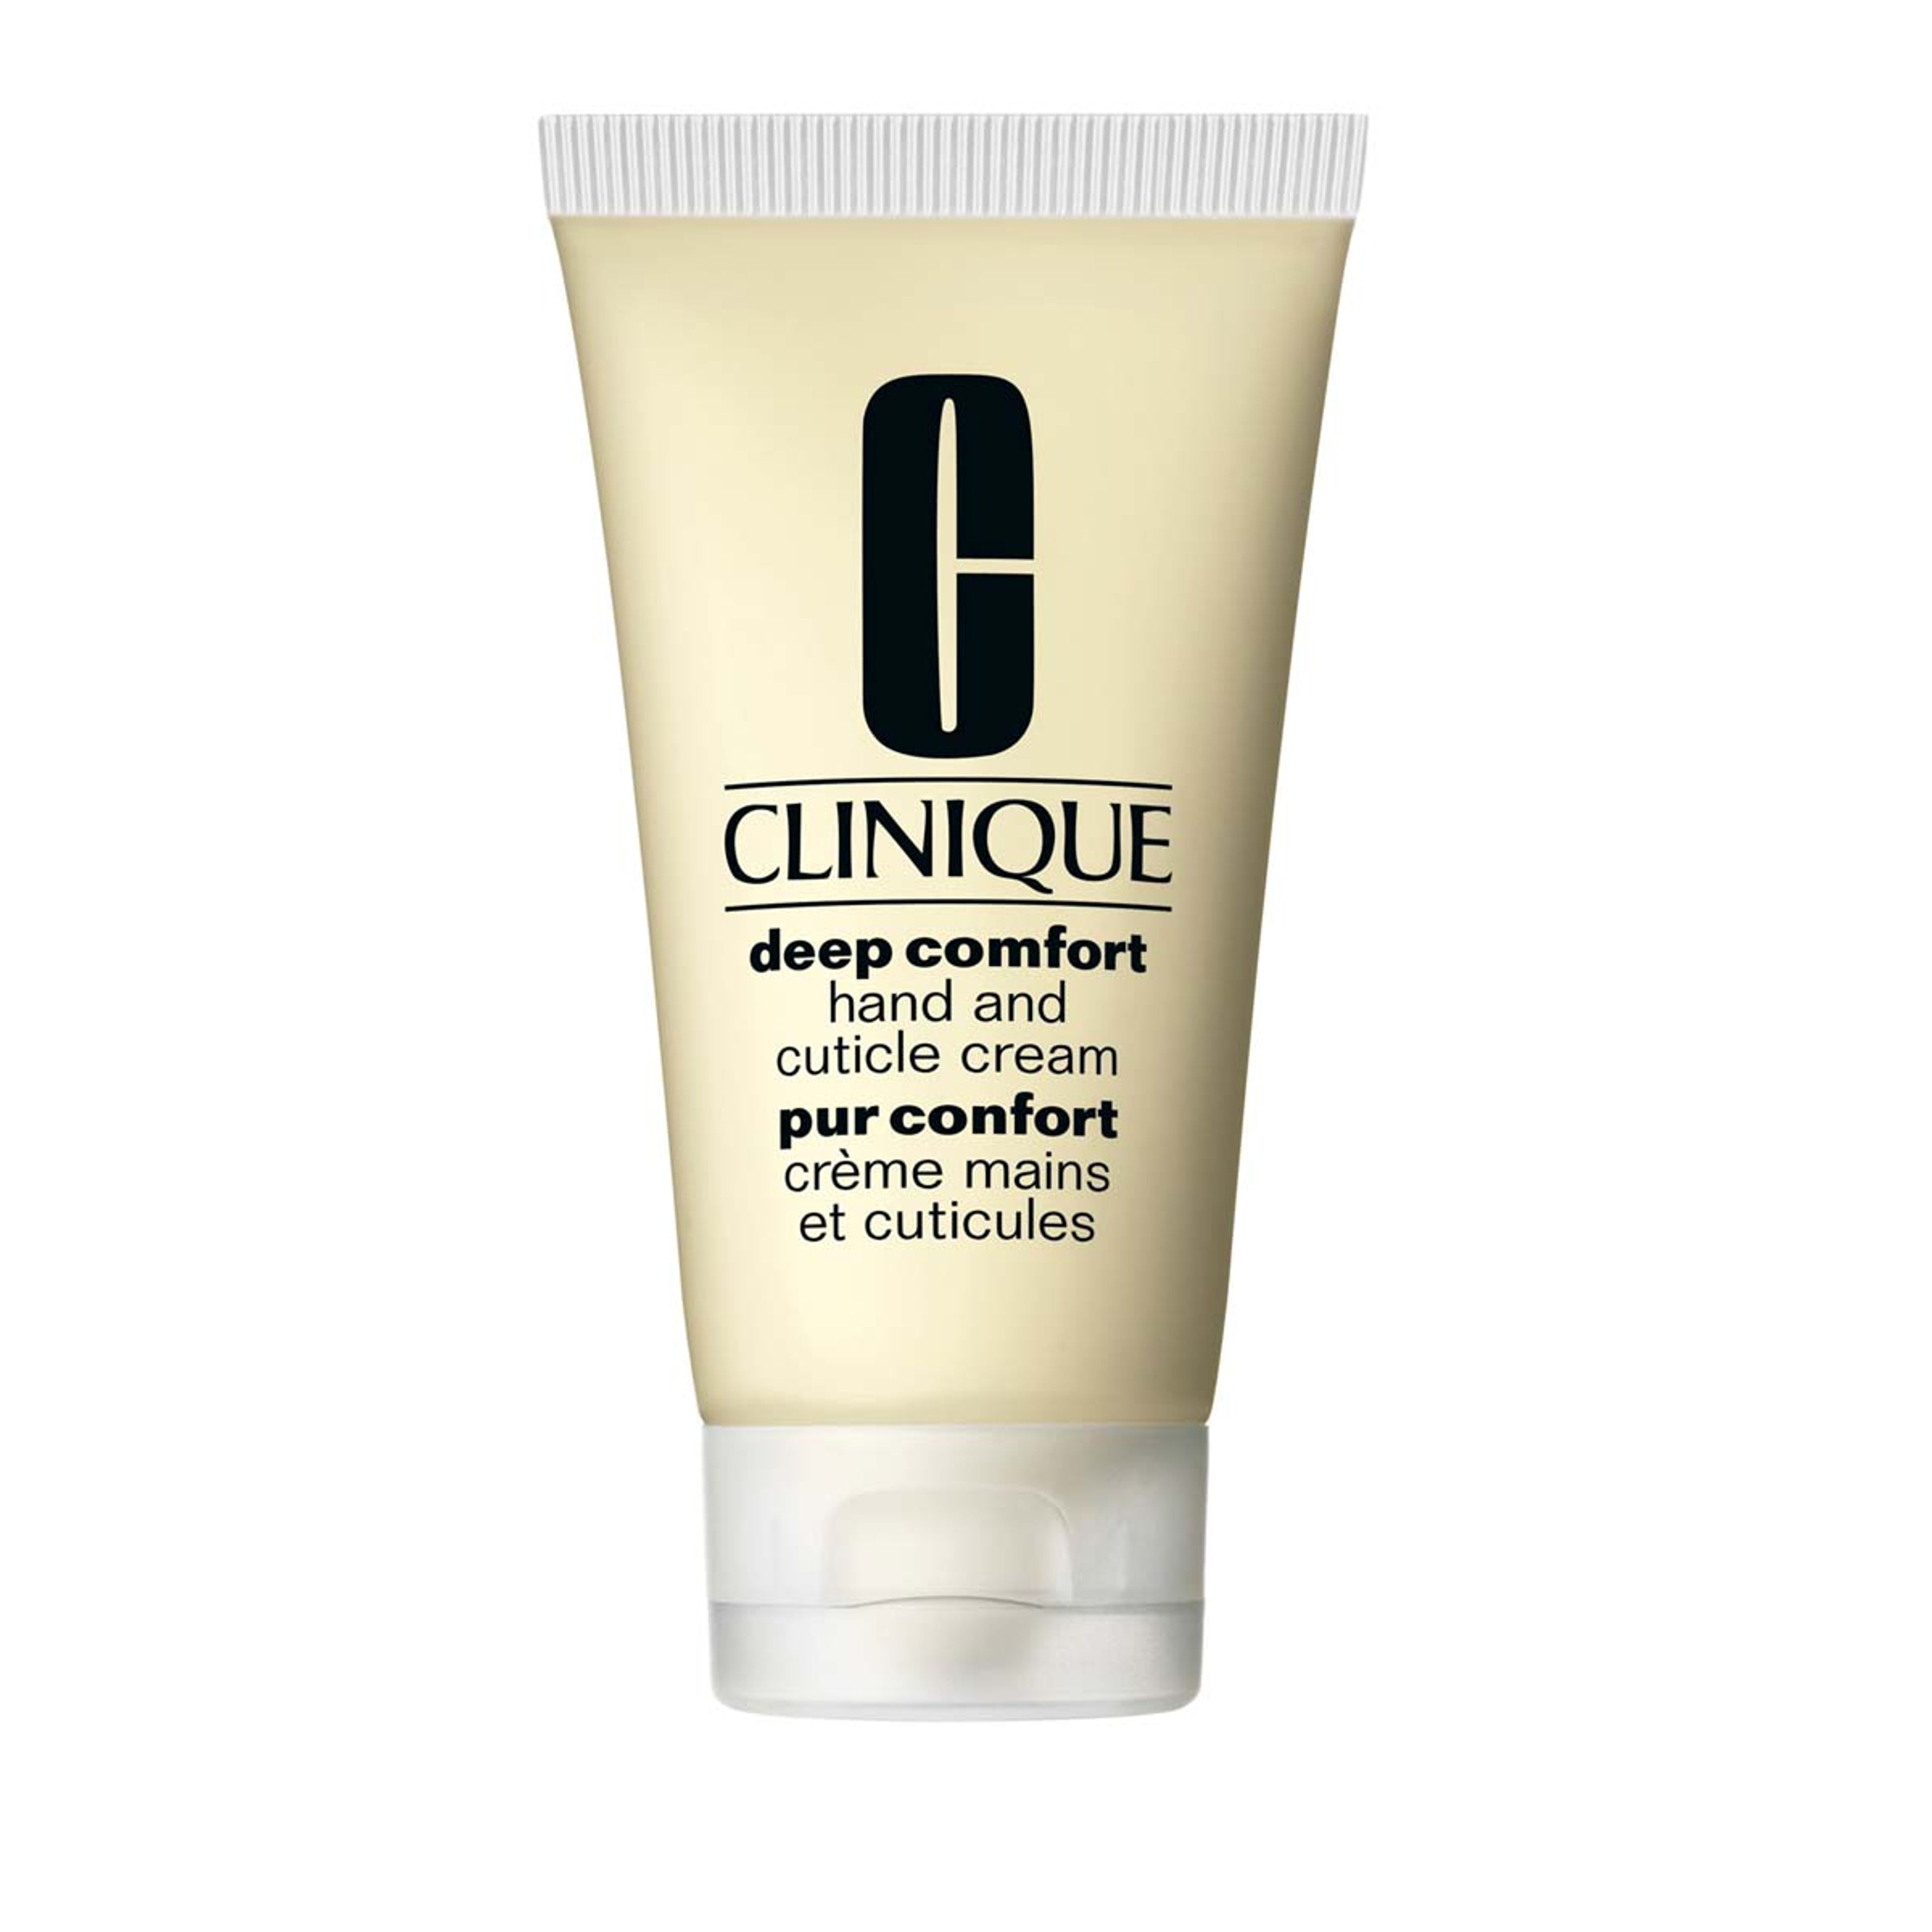 Clinique Deep Comfort Hand And Cuticle Cream 1